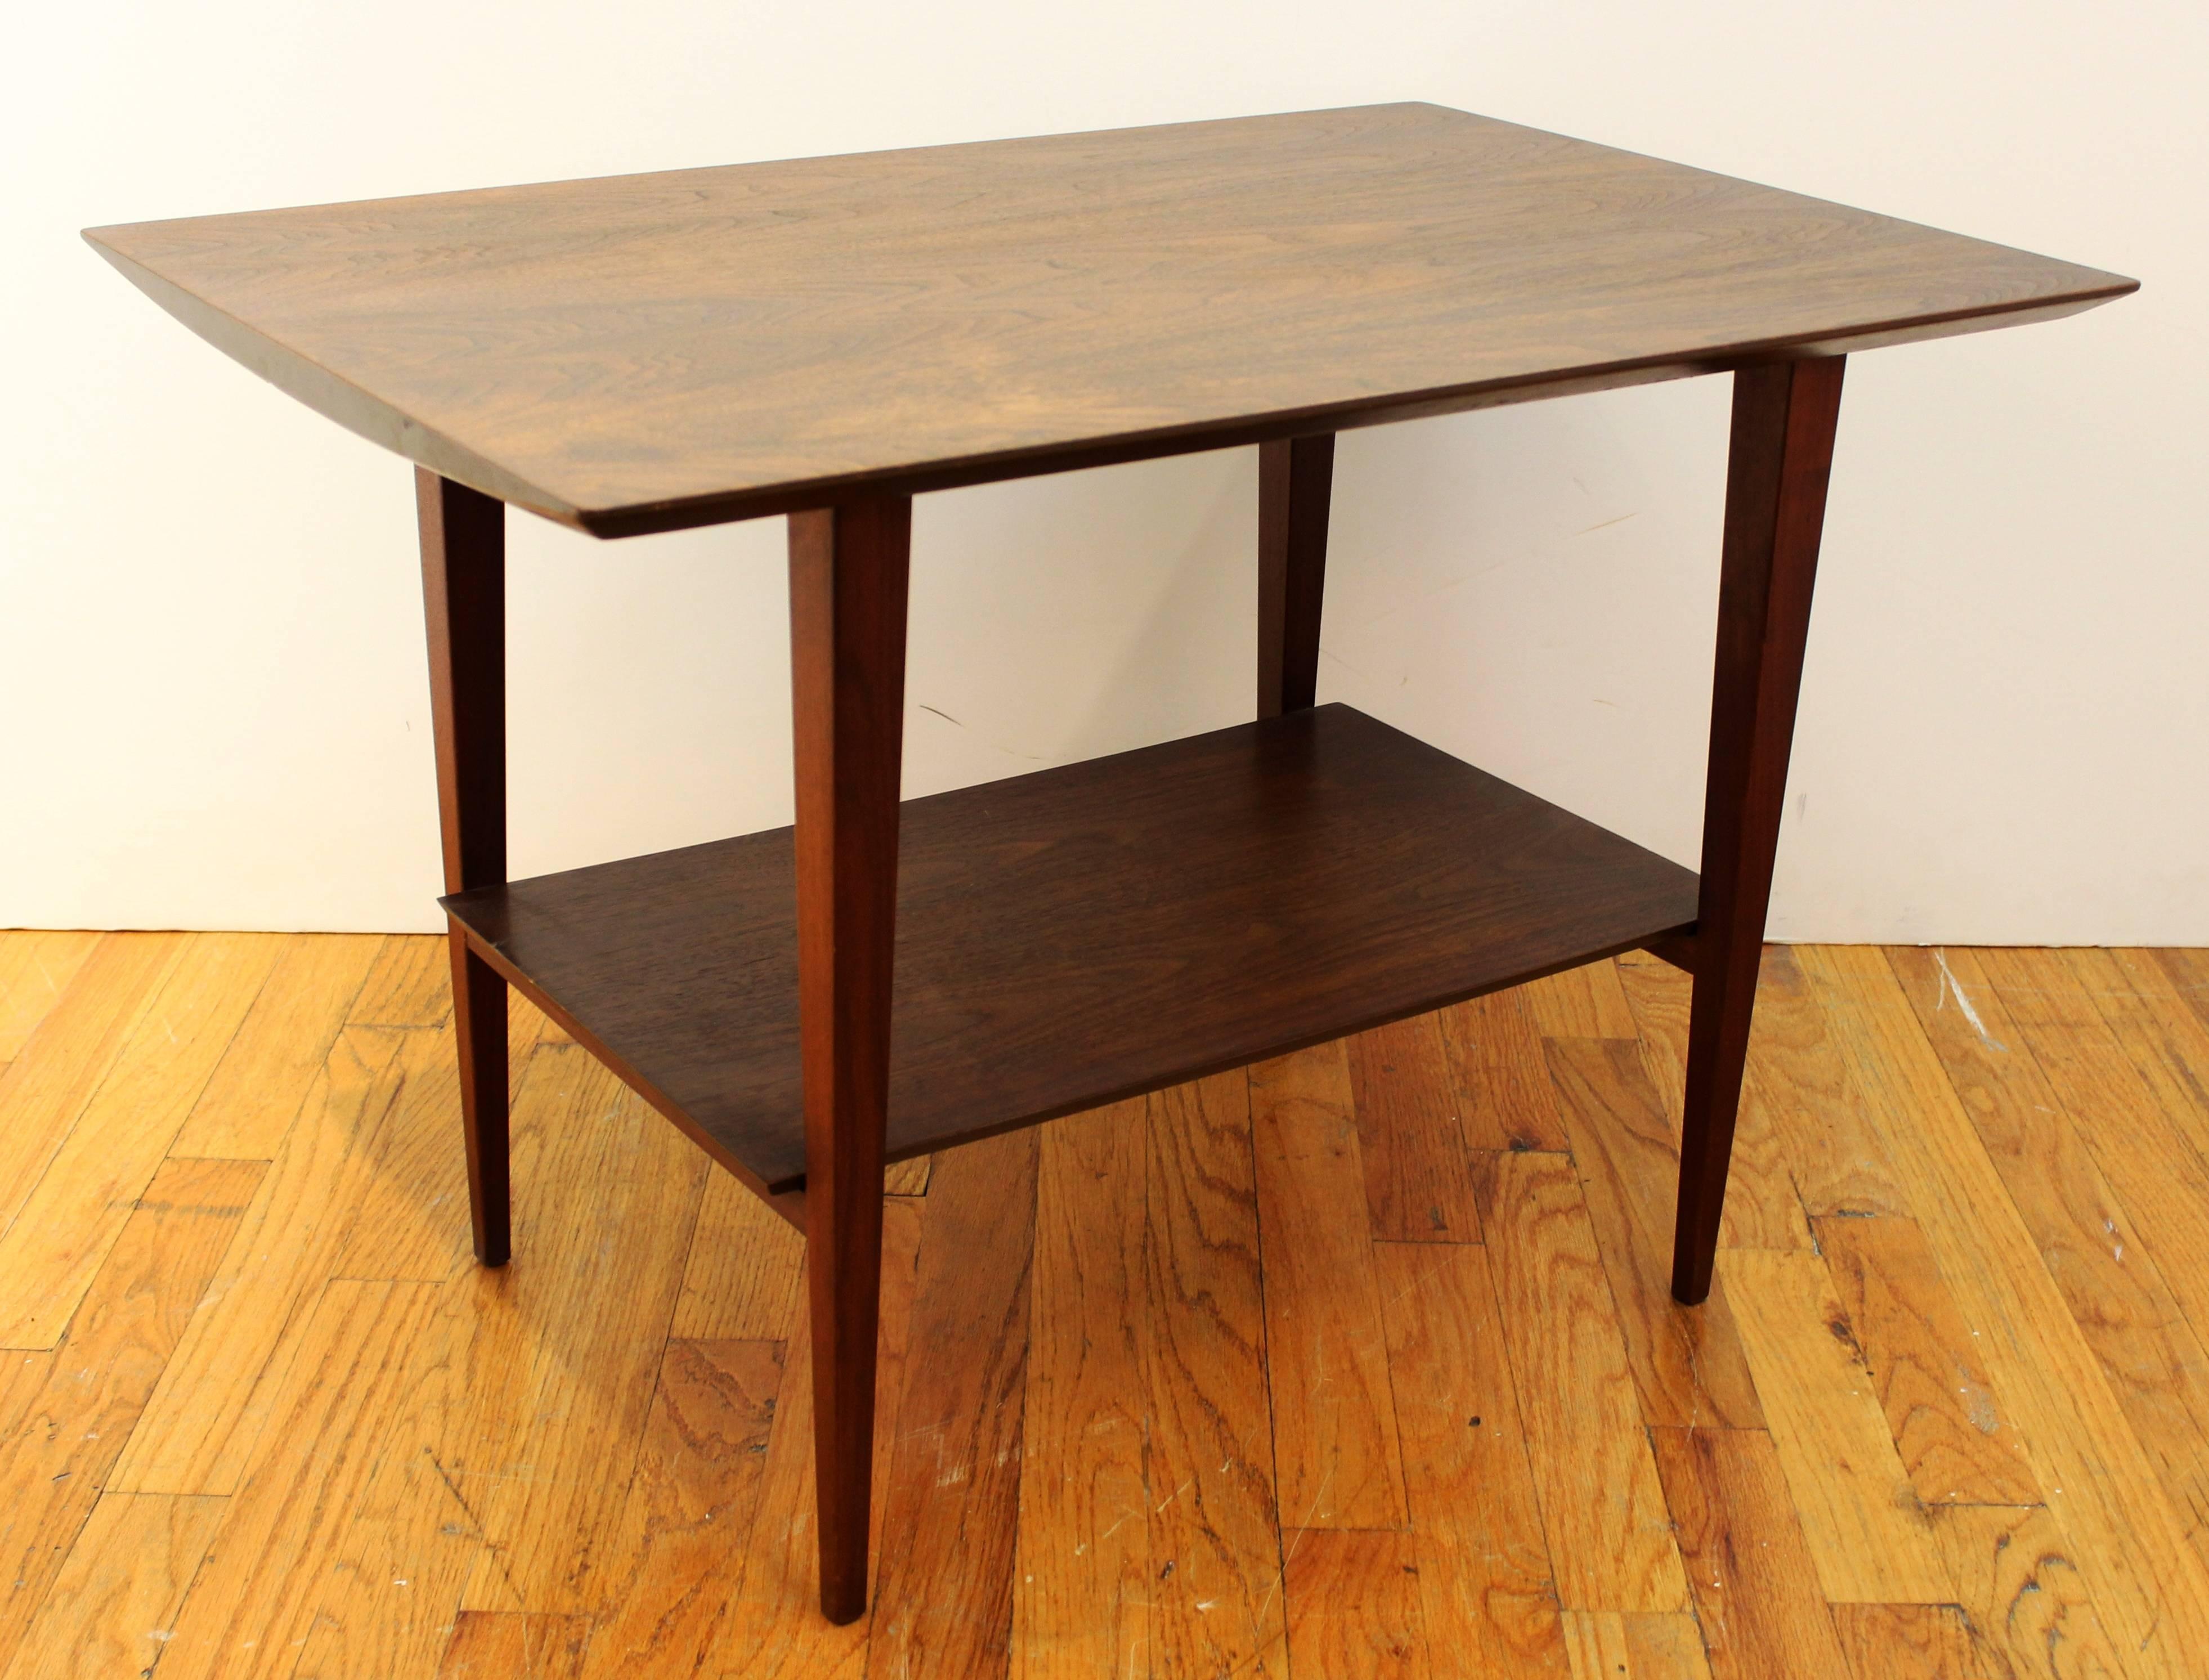 A Mid-Century side table in teak with a single shelf below the top and bevelled edges in the Scandinavian Modern style. In good vintage condition consistent with age and use. 110883.